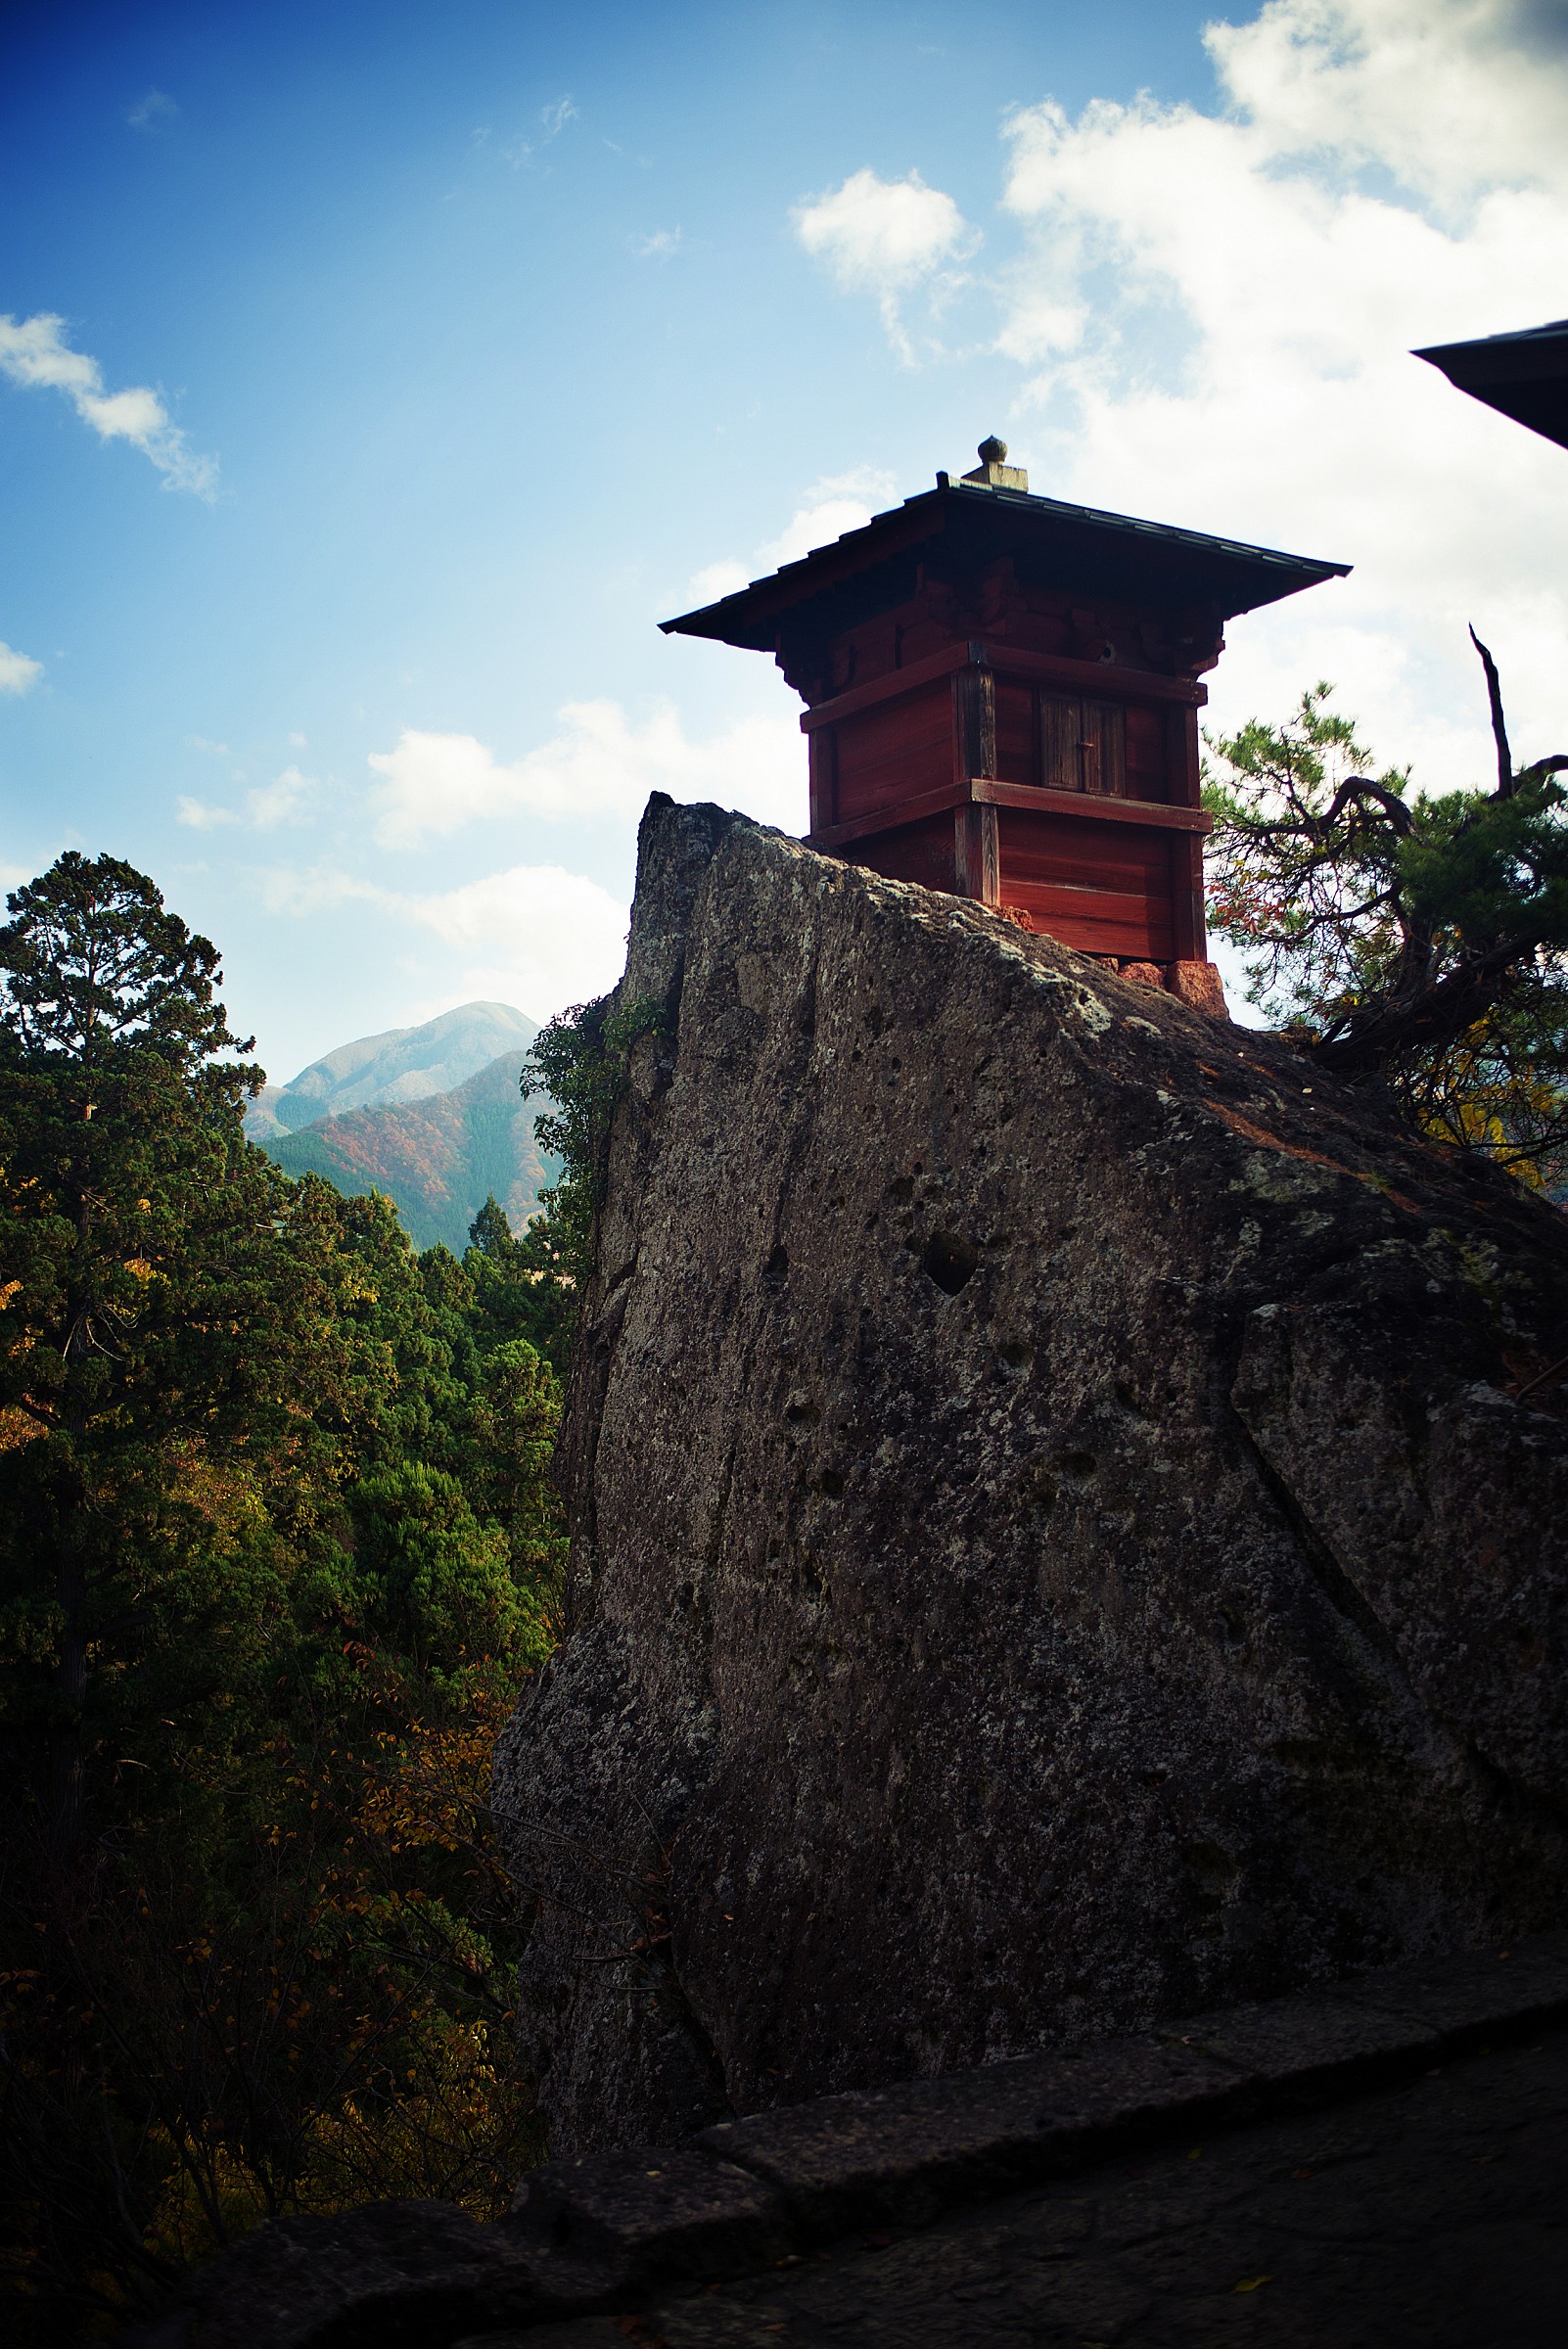 Yamadera - the temple of the mountain...